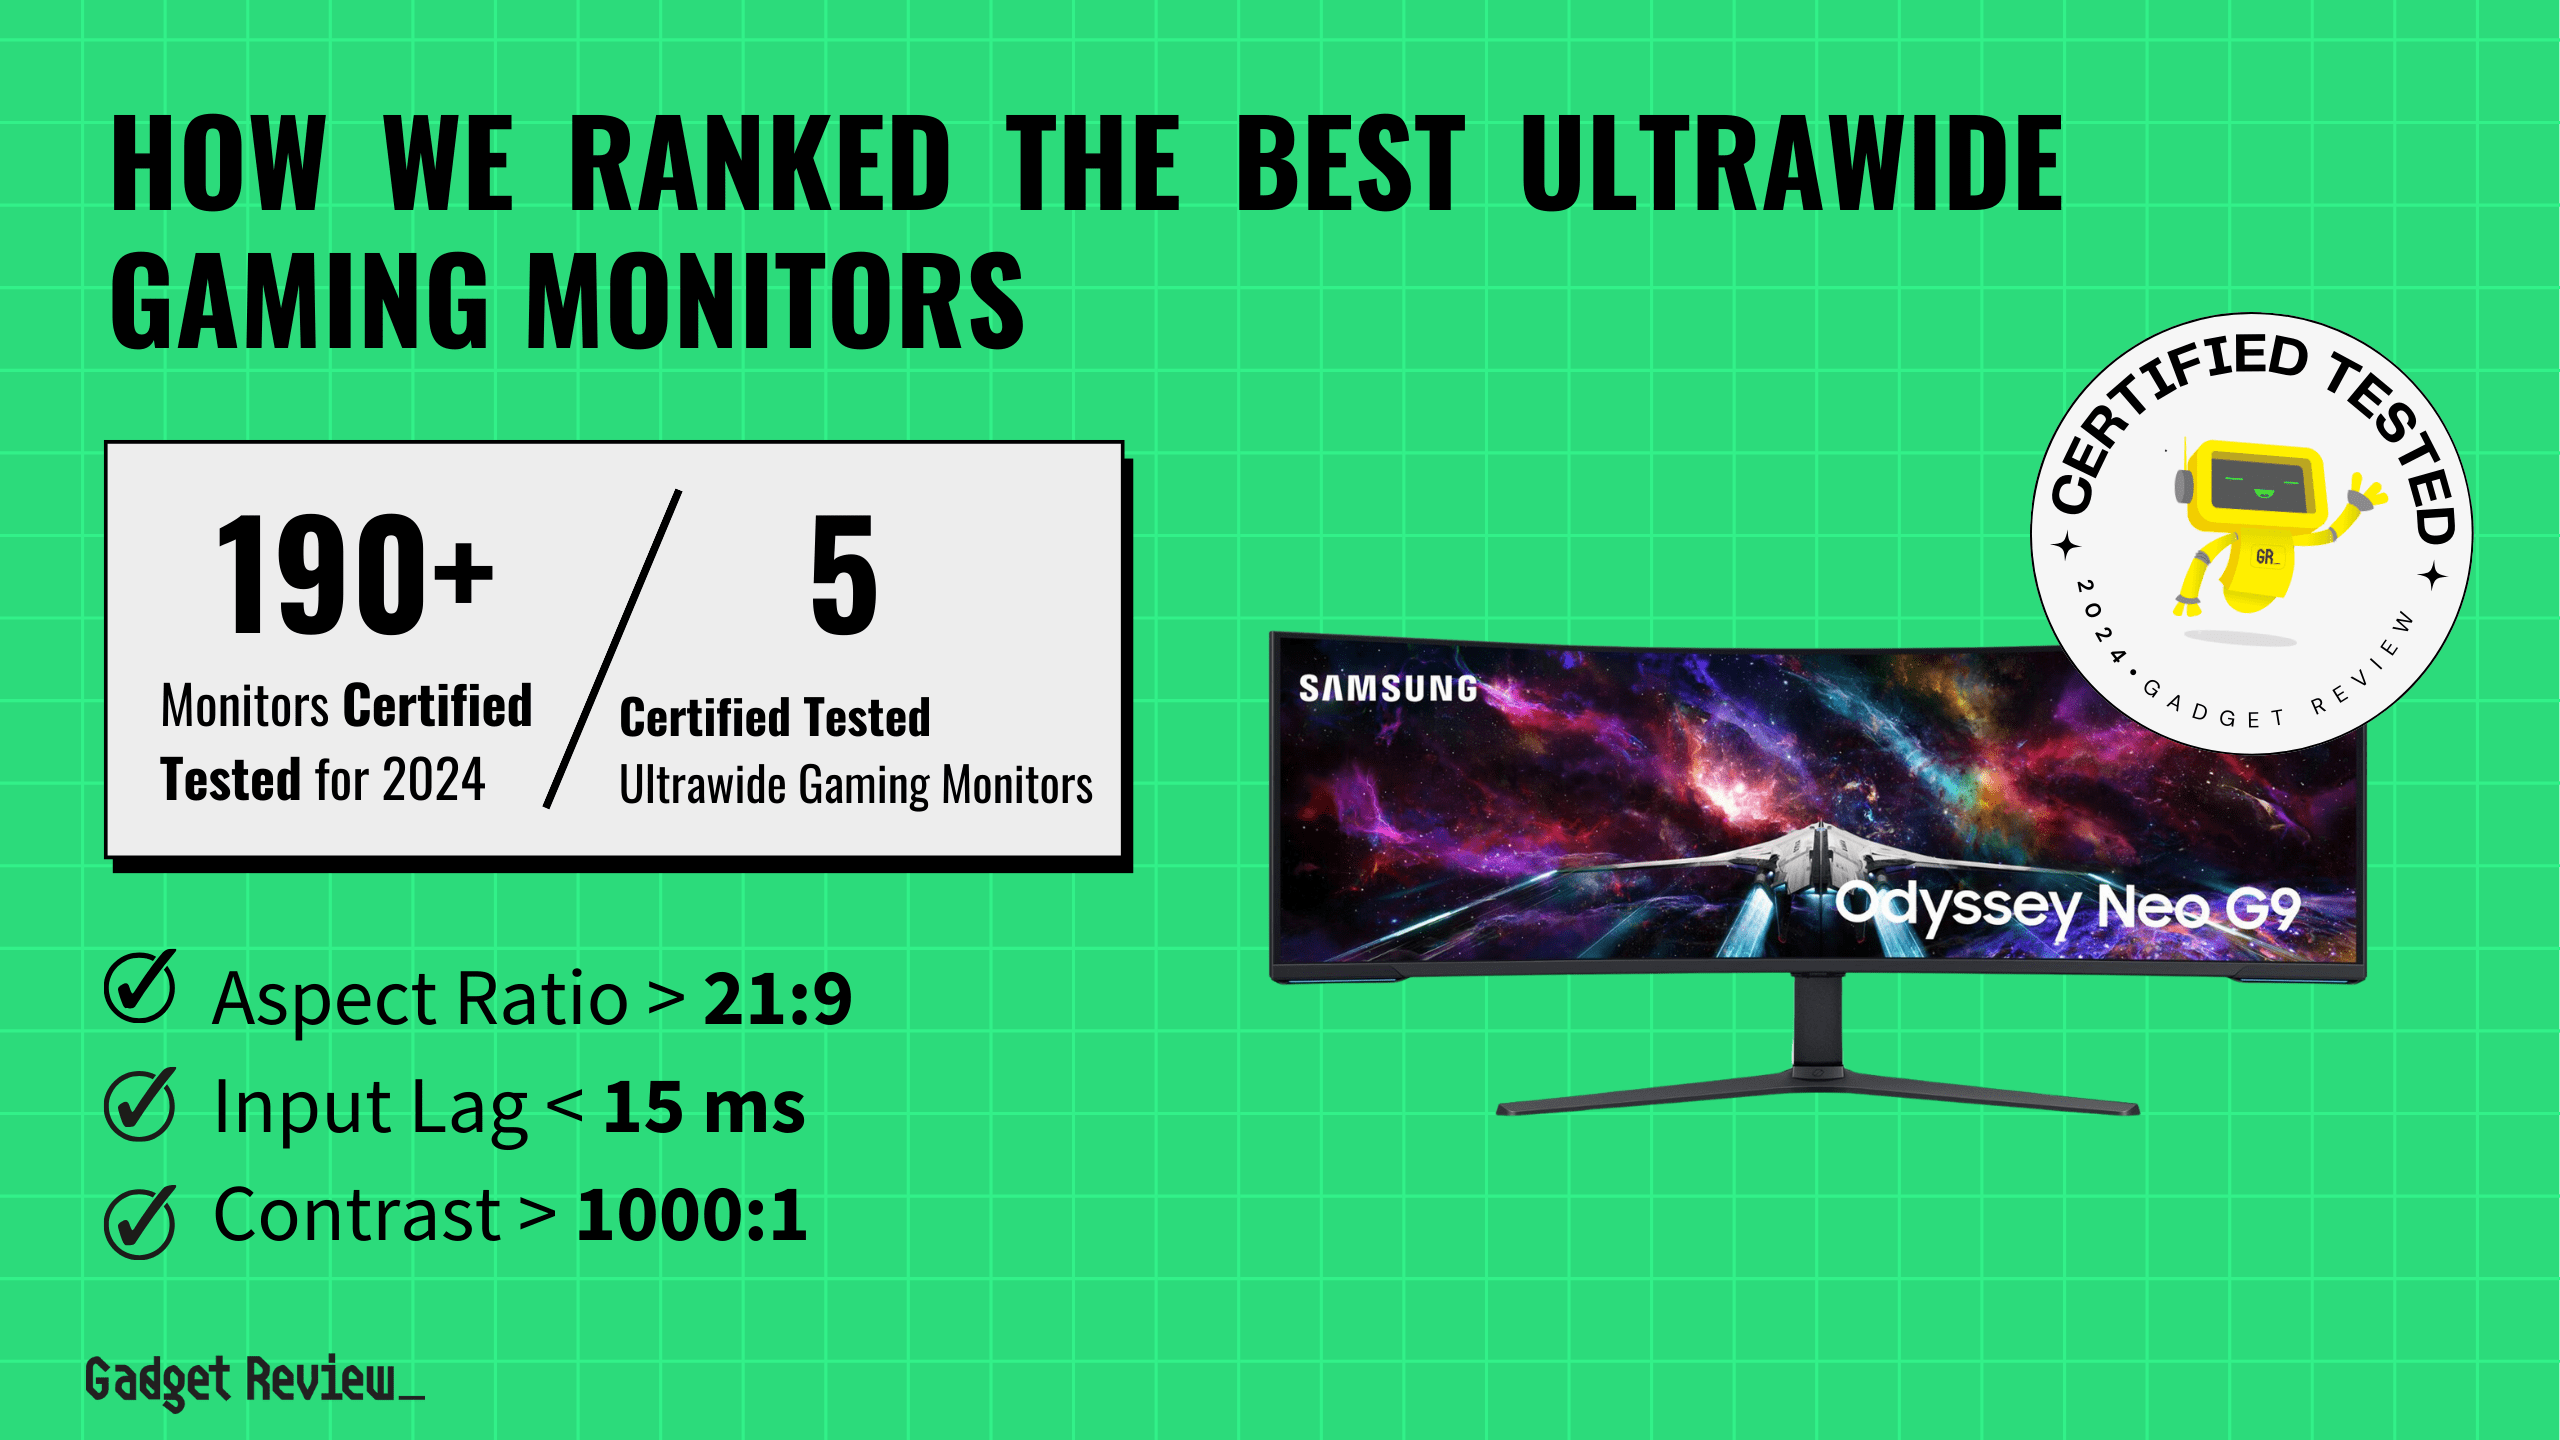 best ultrawide gaming monitor guide that shows the top best gaming monitor model